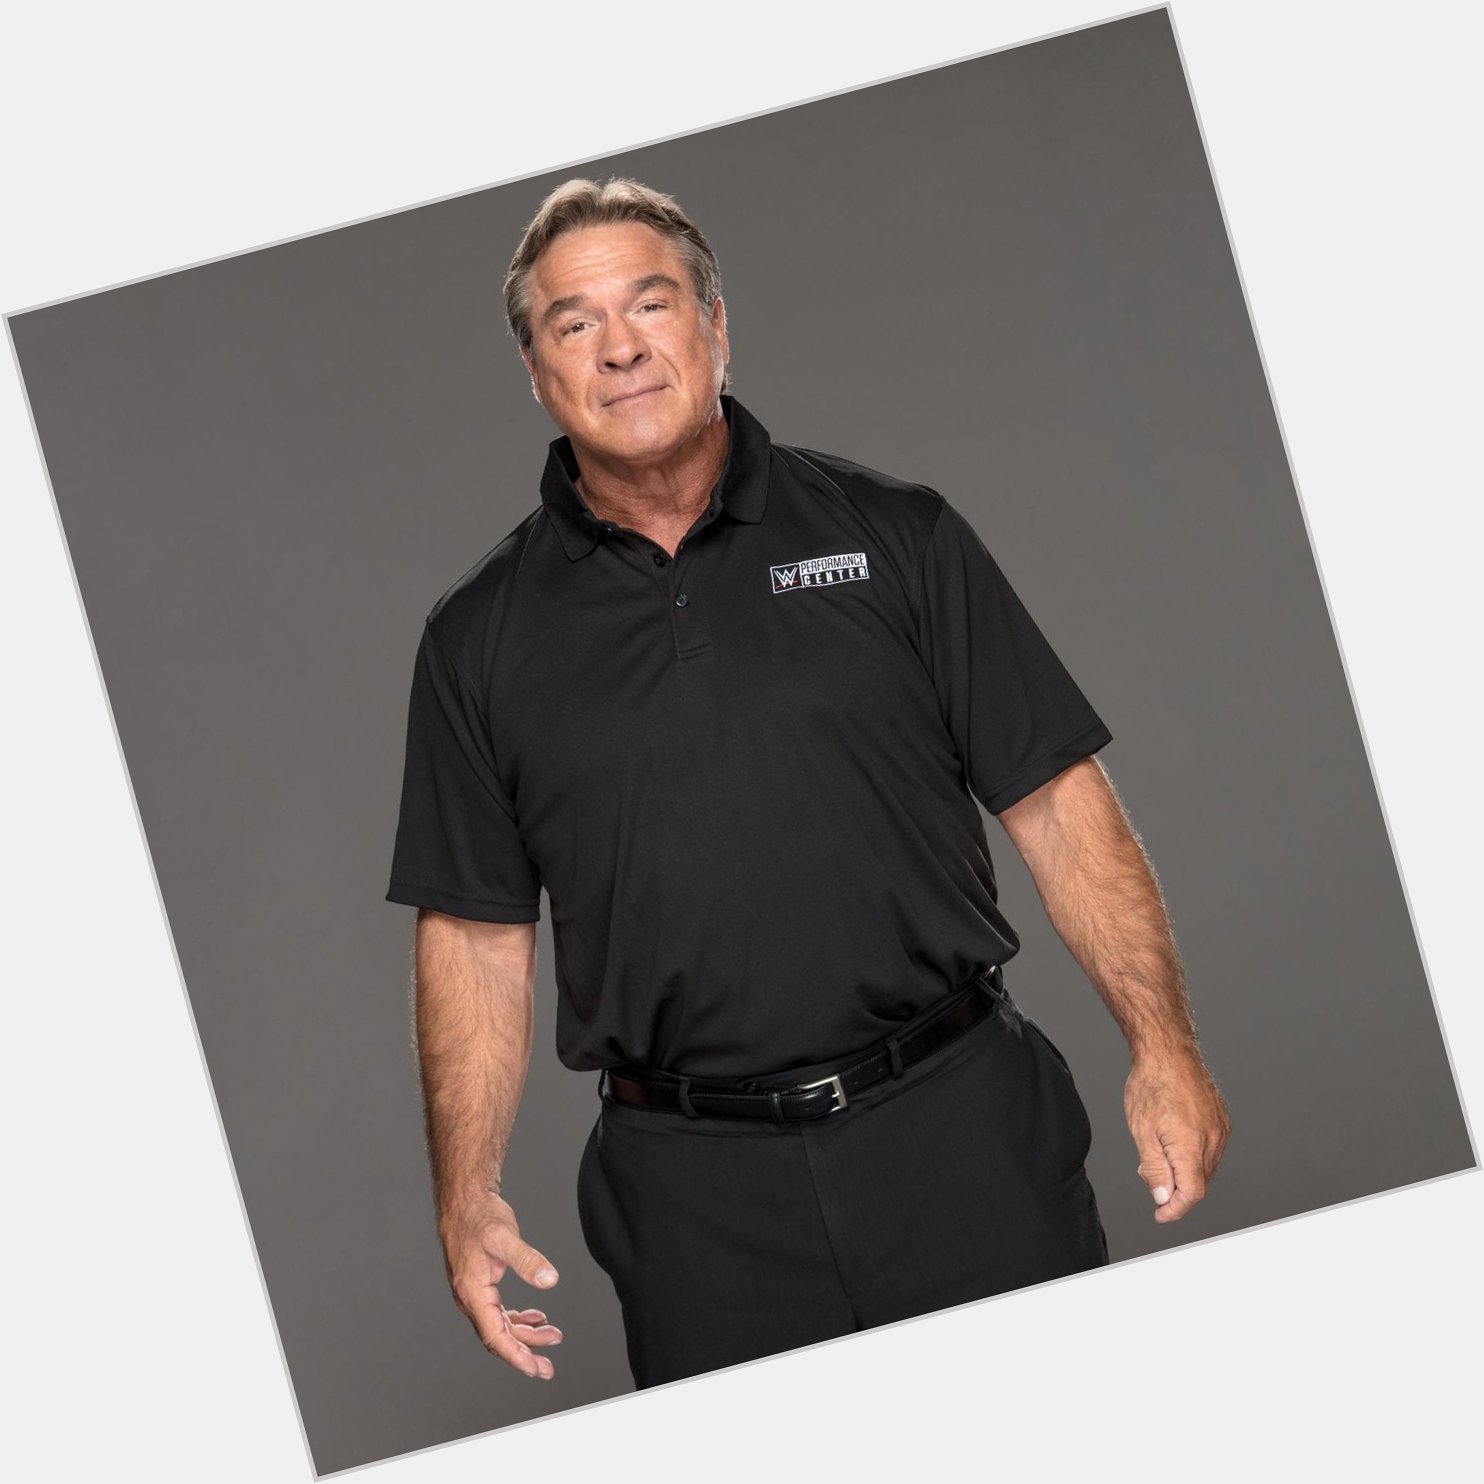 Happy Birthday to pro wrestling legend Terry Taylor who turns 67 today! 